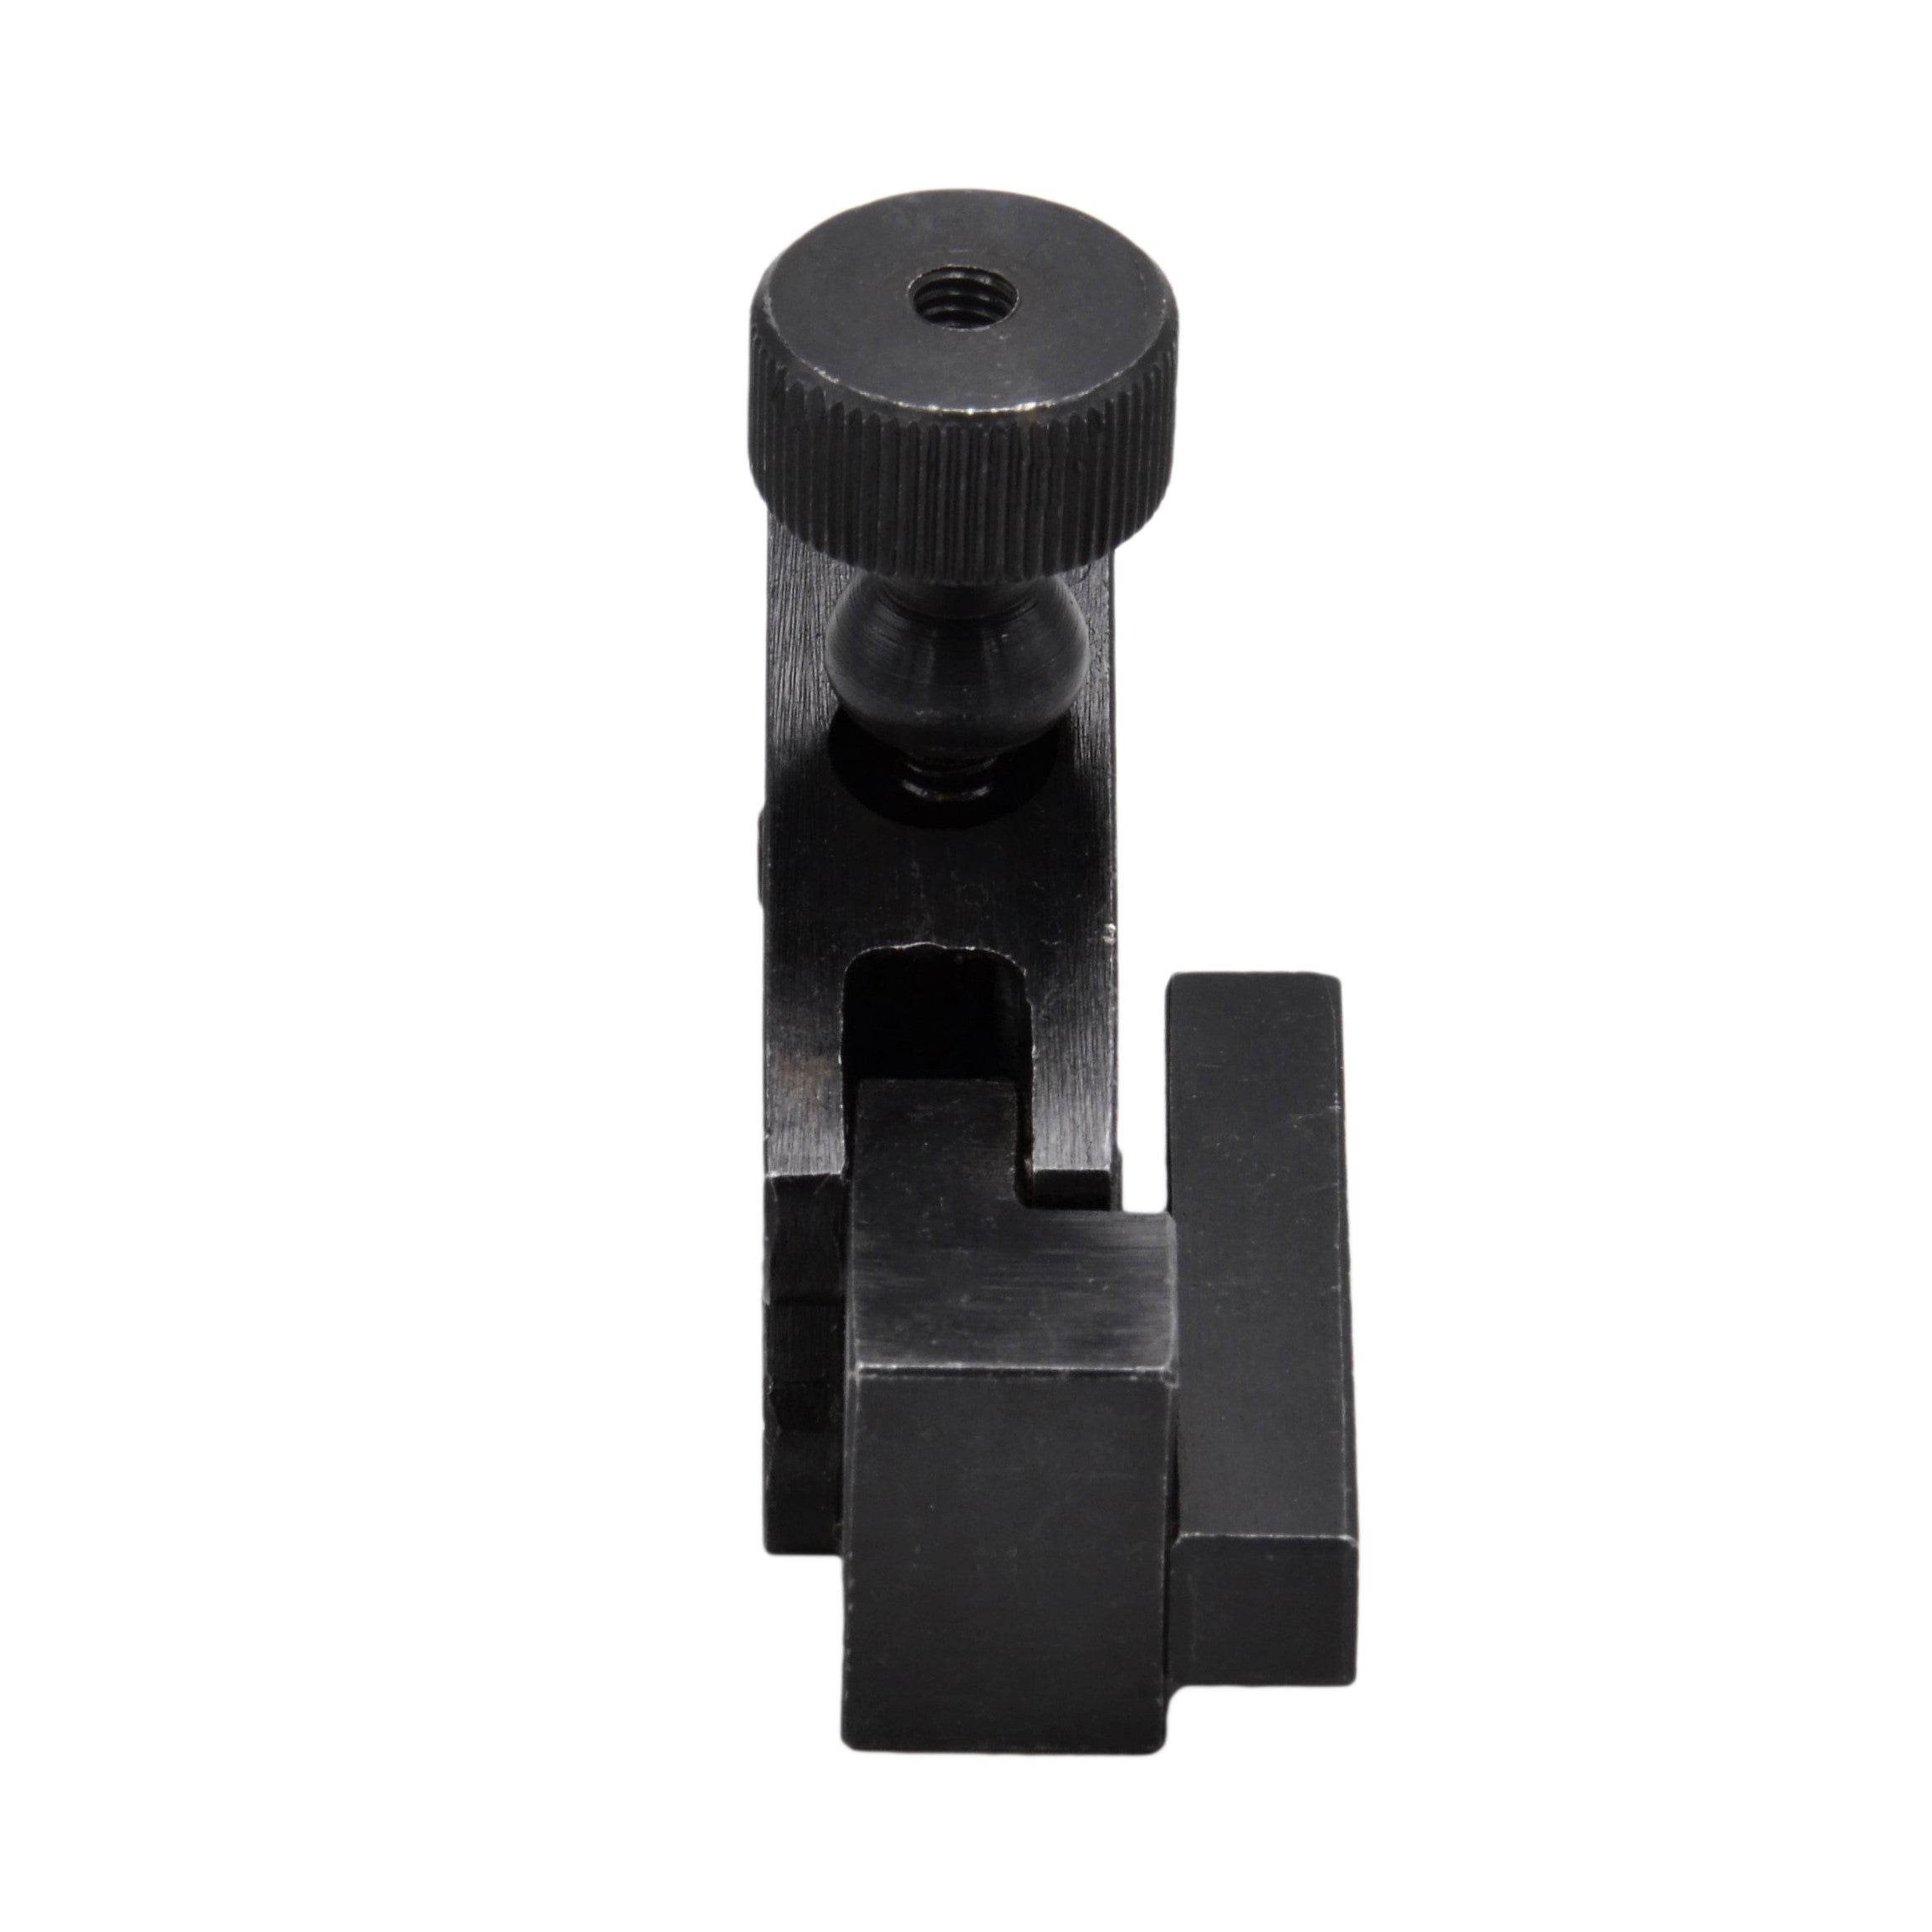 Spring Loaded V Clamp Type 5-20 mm Knurling Tool 10 mm Mount